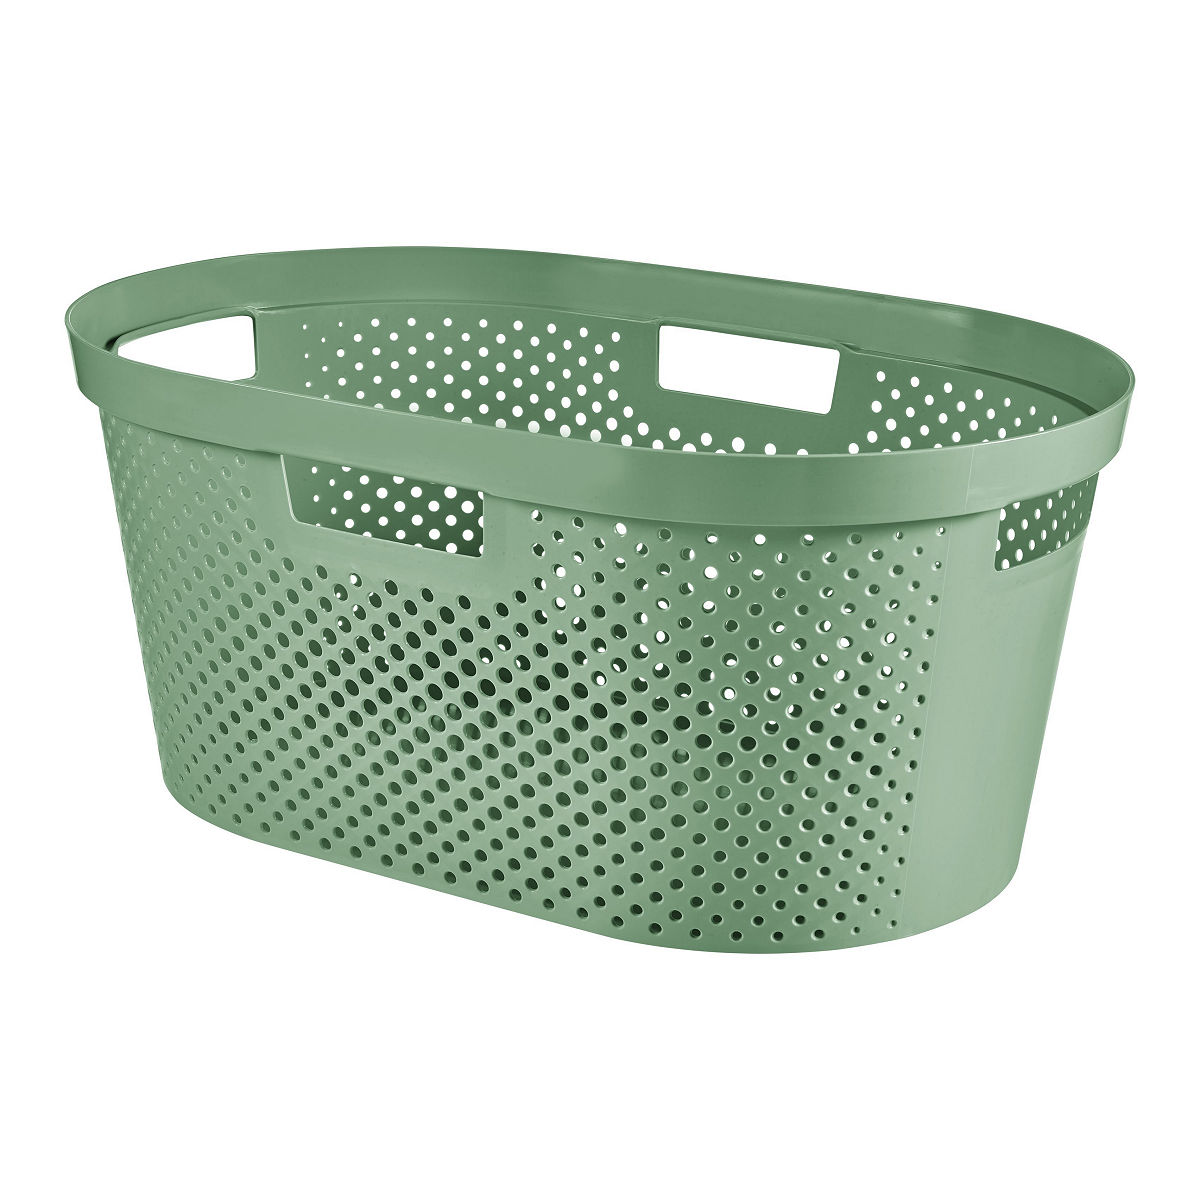 CURVER WASMAND 40 L GROEN RECYCLE DOTS - 3253924755243